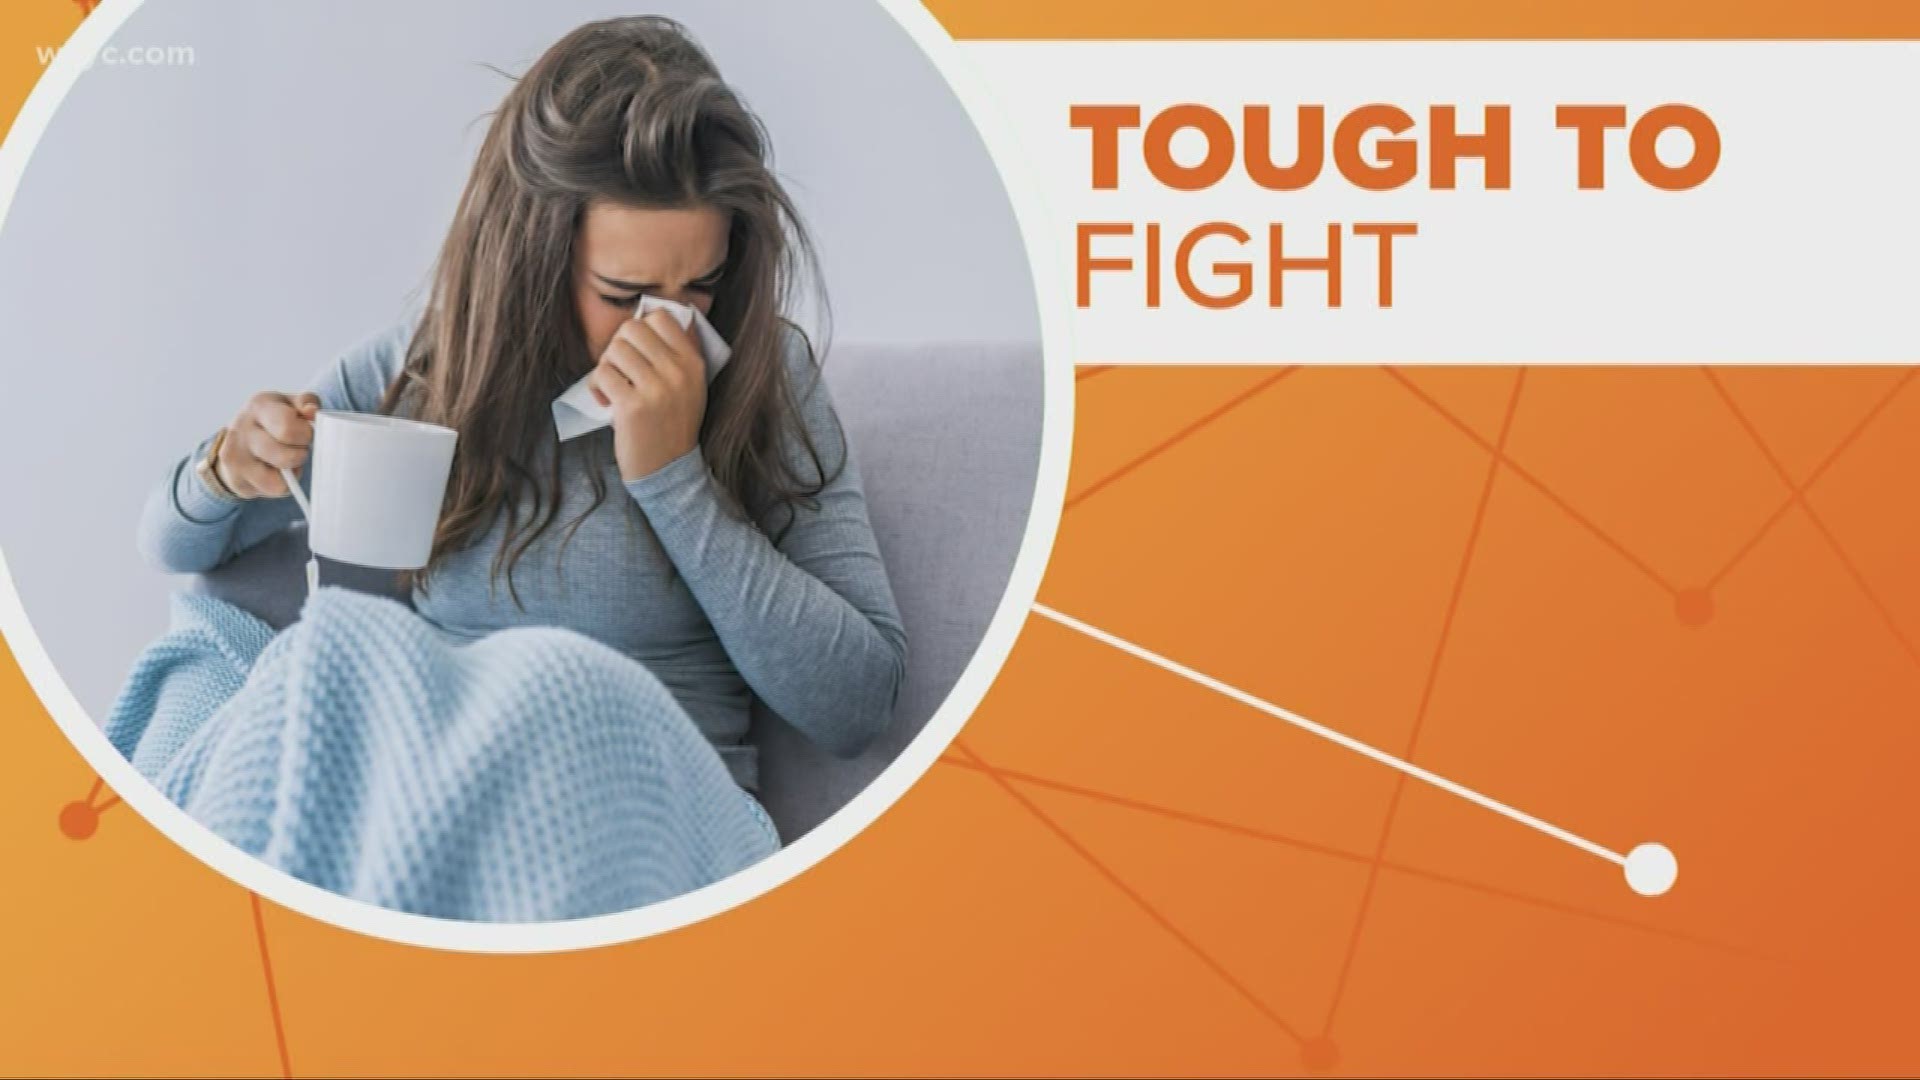 If there's a bug going around your office or school, you're not alone. Chances are, it's the common cold rearing its head.